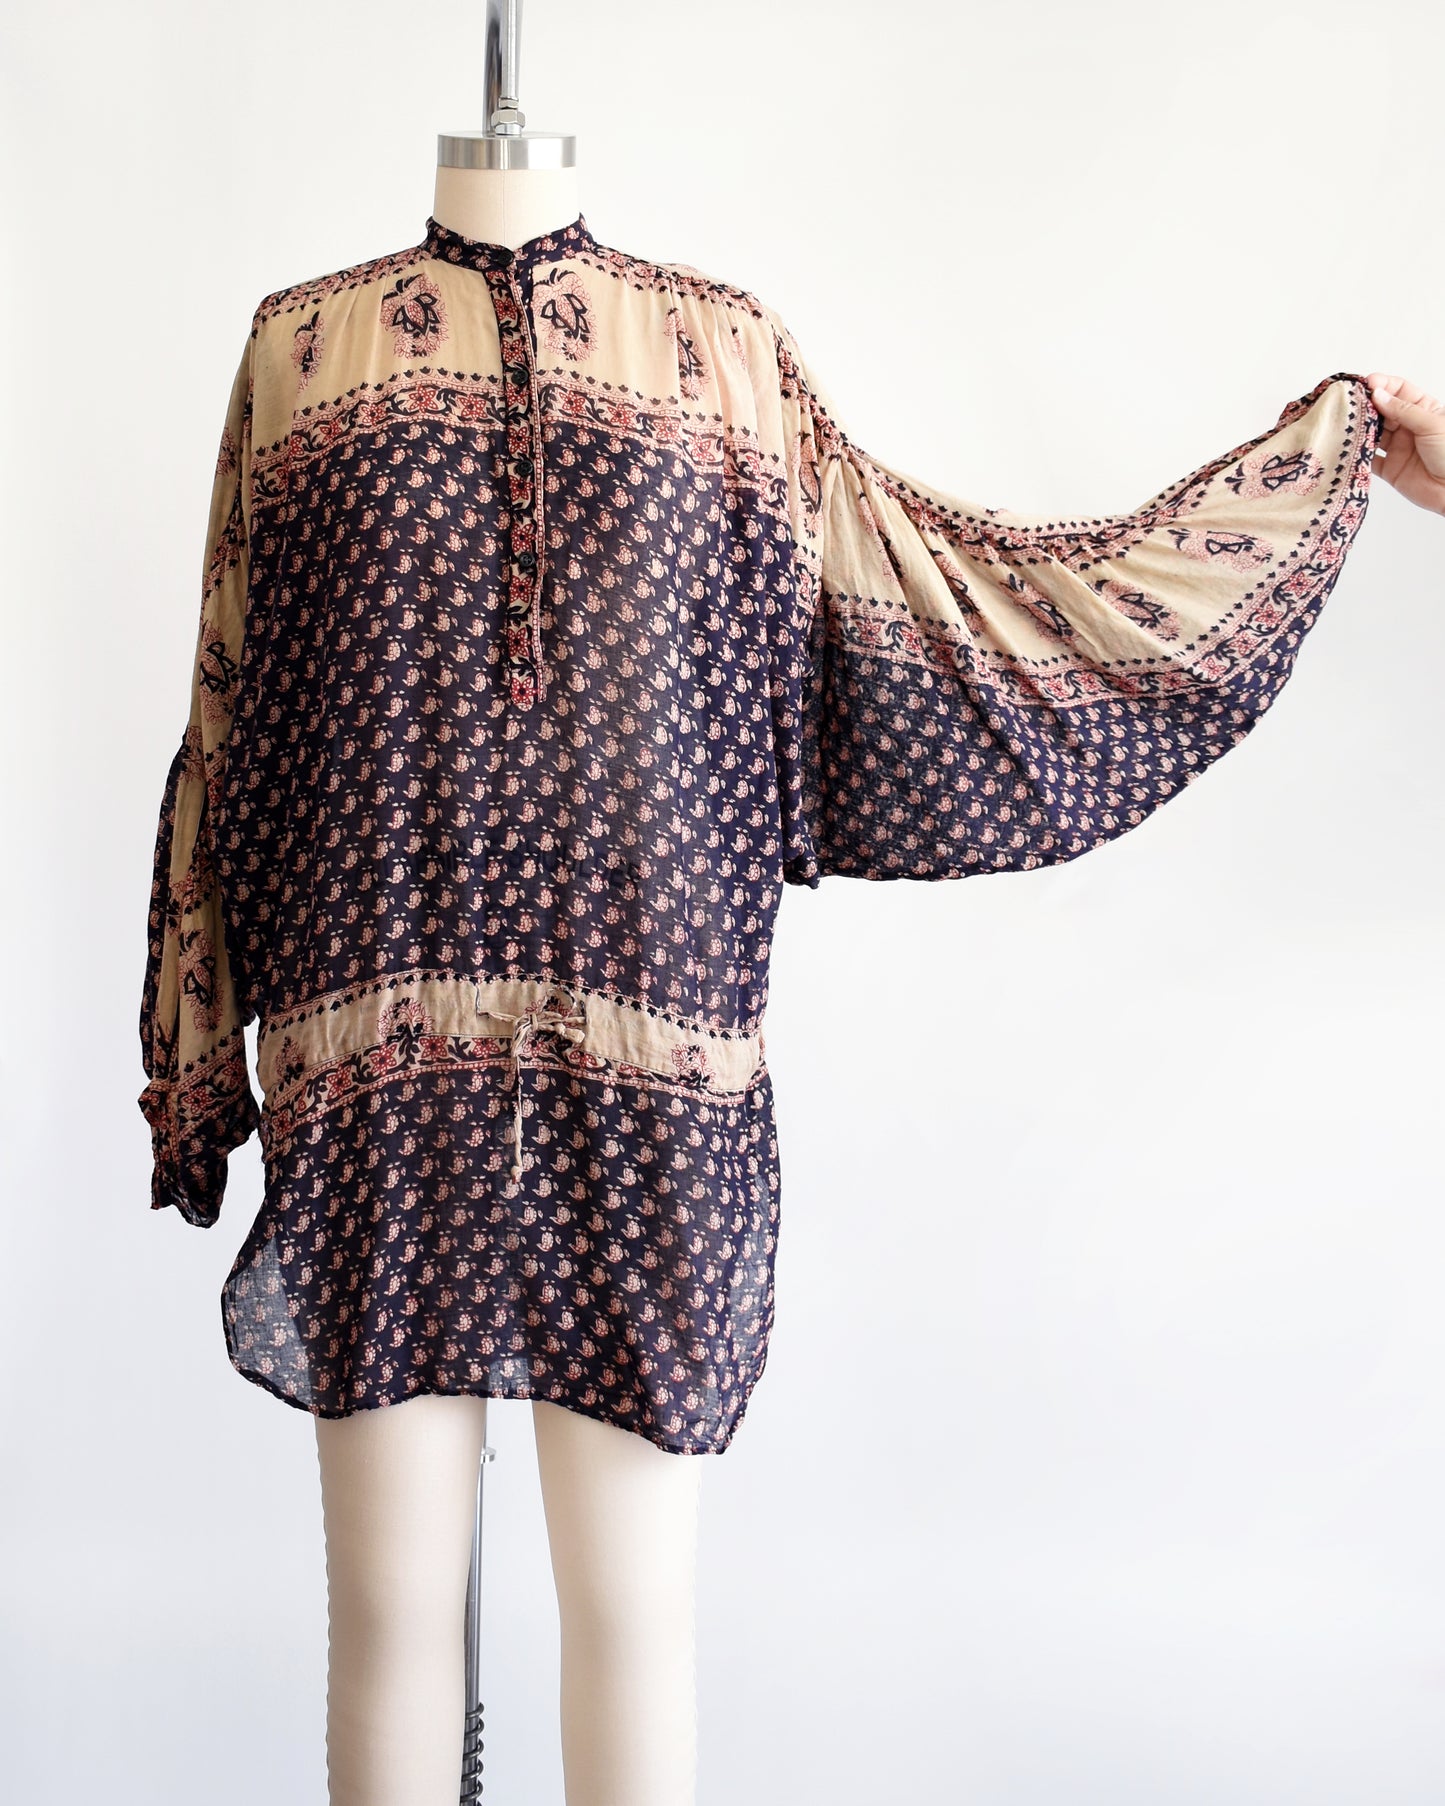 A vintage 1970s Indian cotton tunic made from thin, gauzy navy blue and light tan cotton with a red and navy floral block print. The top has large dolman balloon style sleeves which are shown